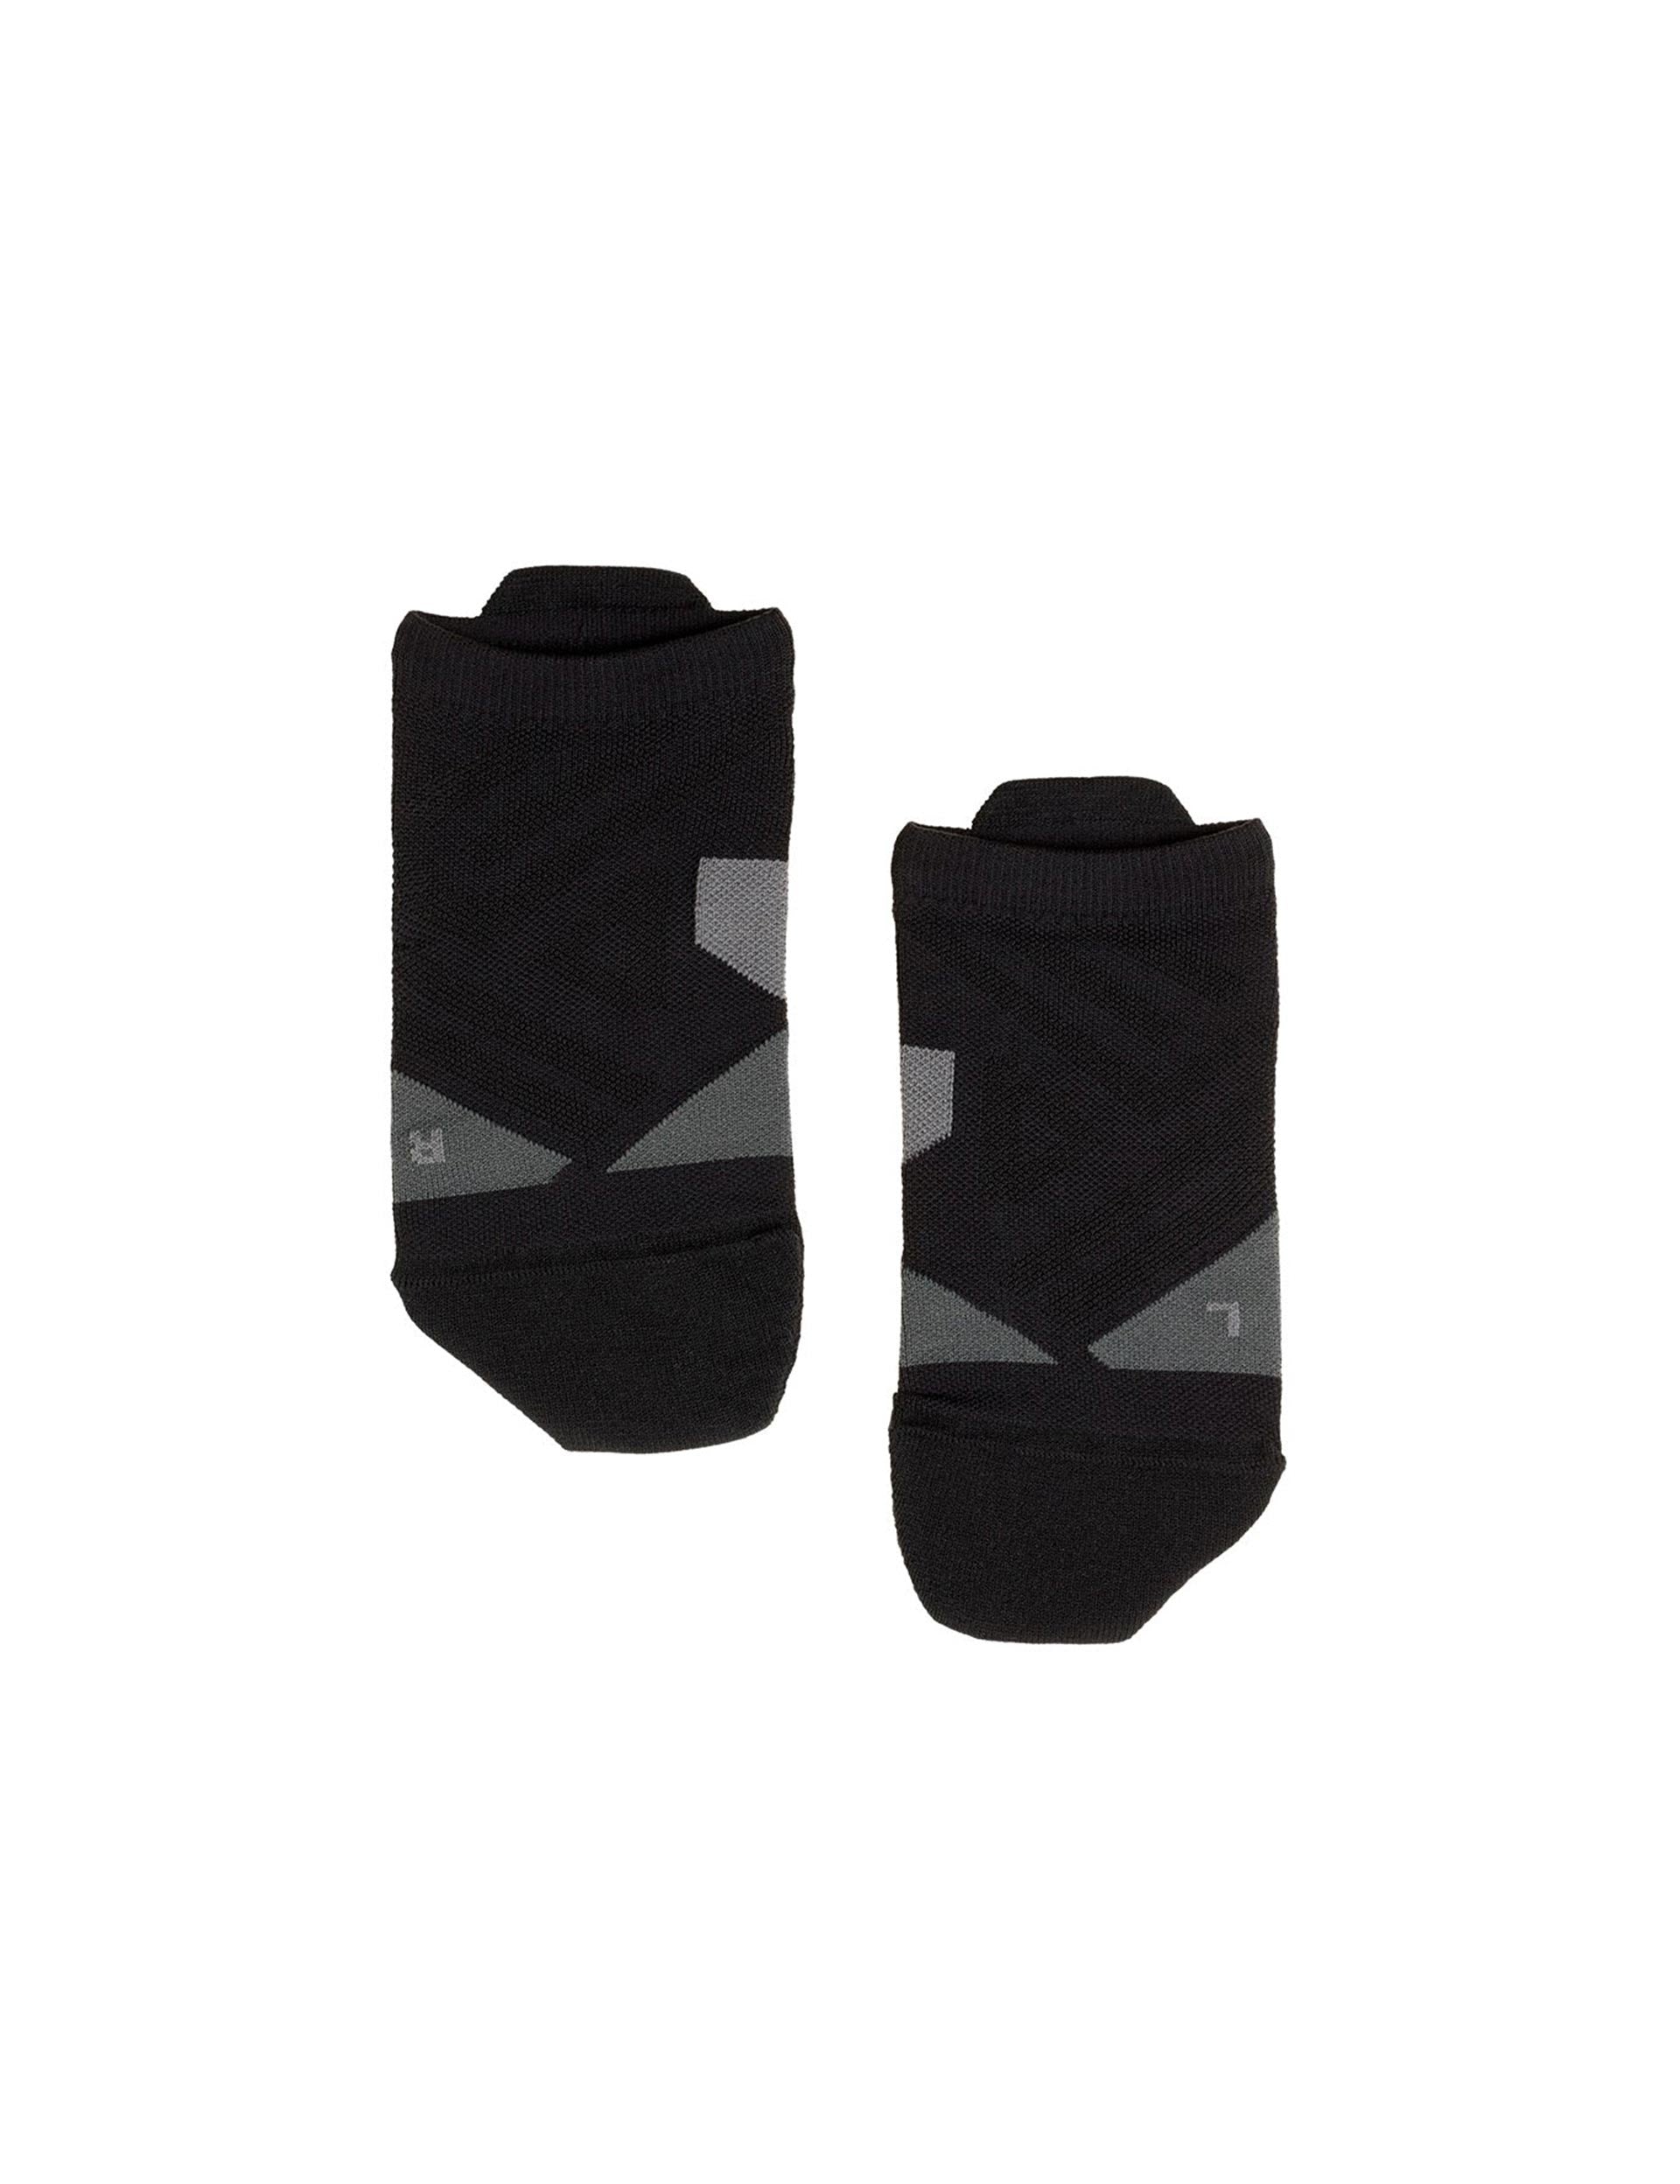 ON Running Low Sock - Black/Shadow | Women'simages1- The Sports Edit